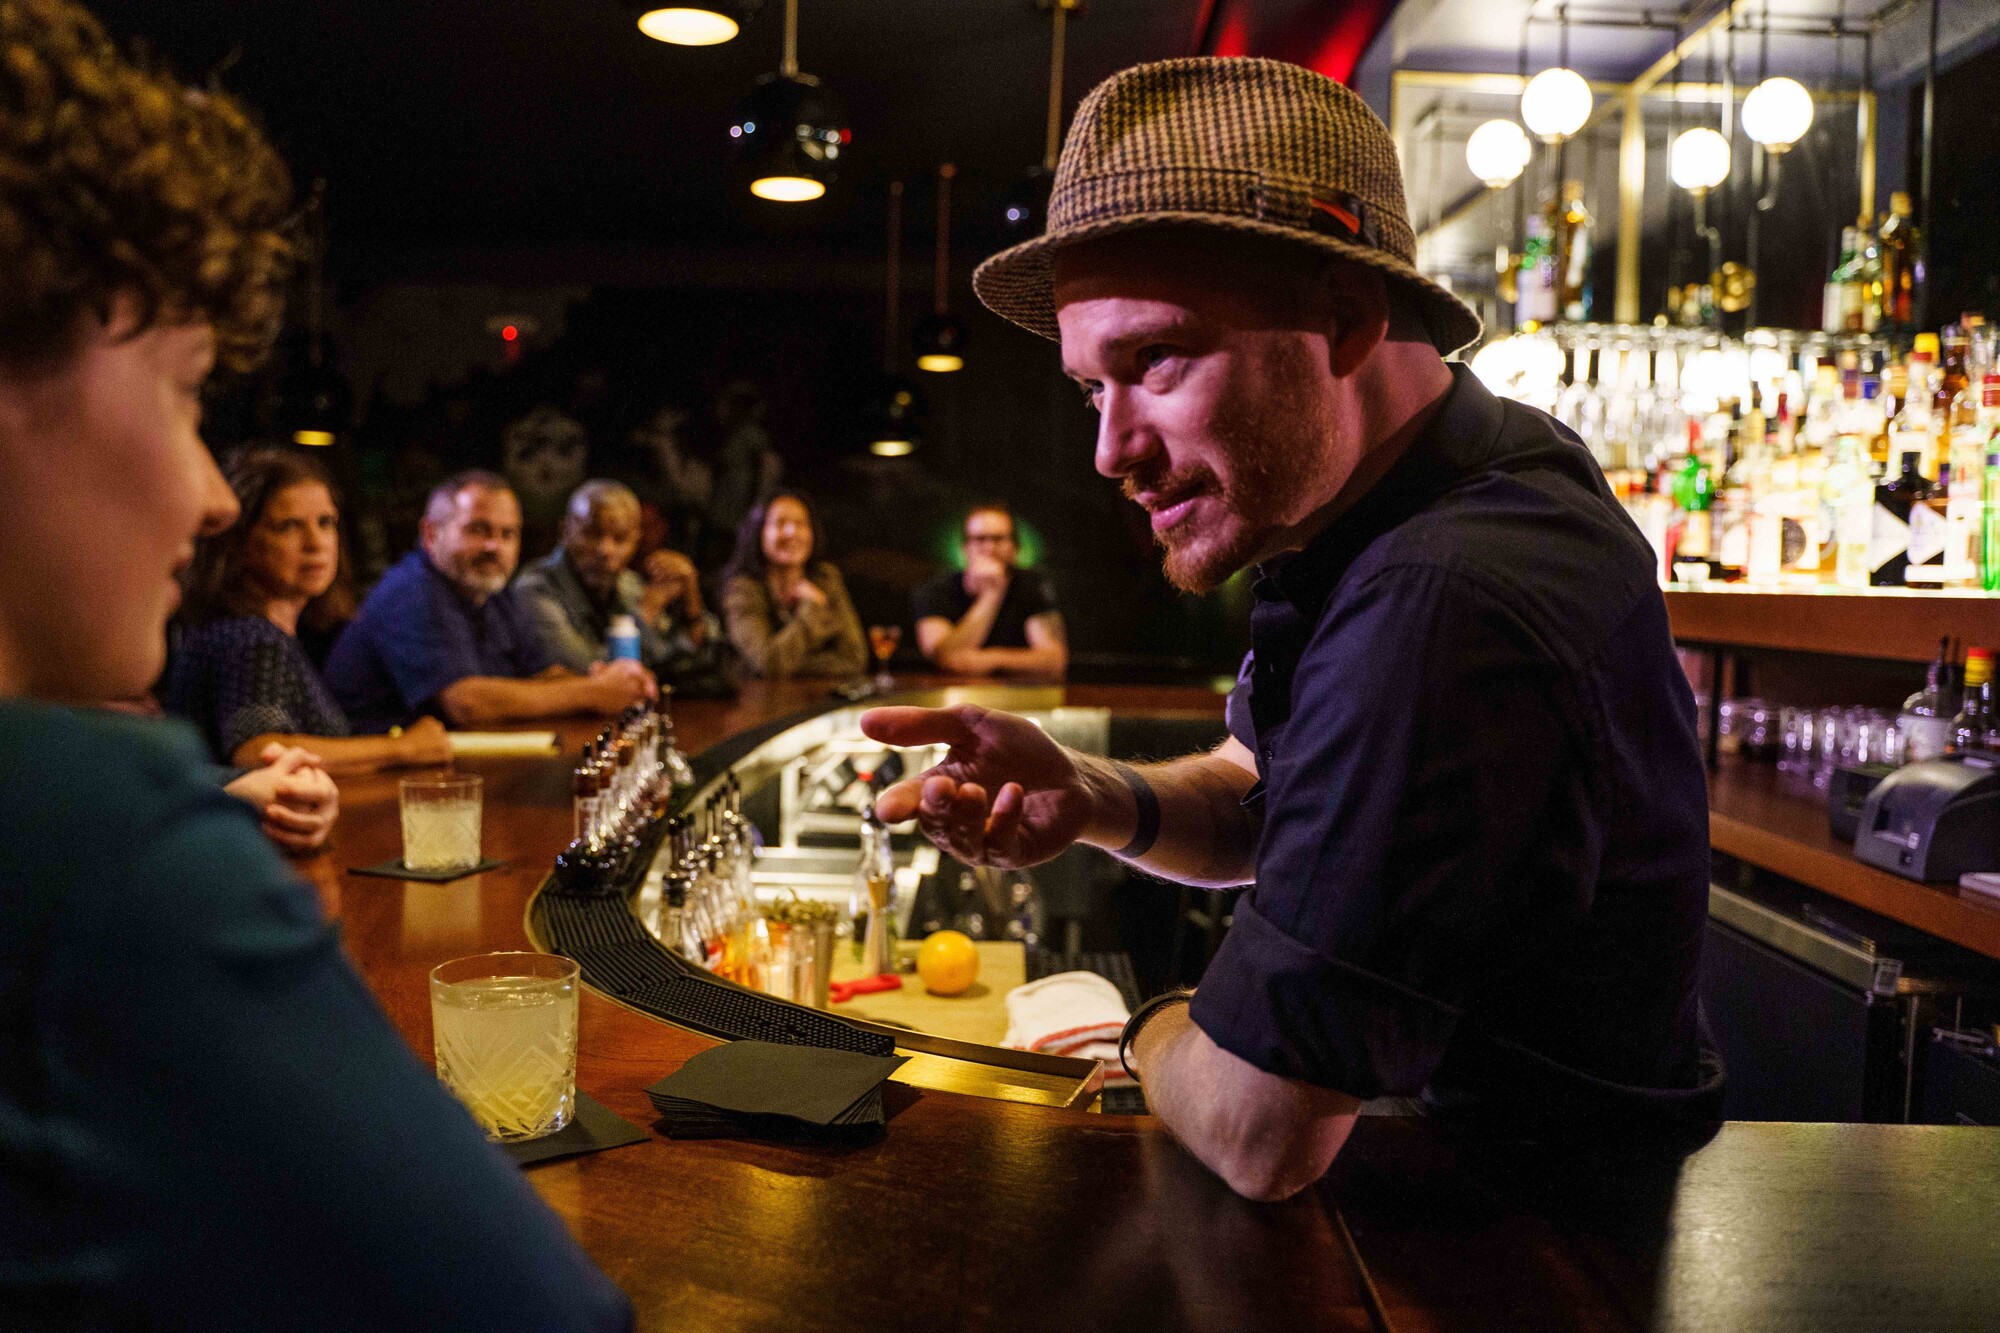 A bartender in a fedora speaks to a bar patron.